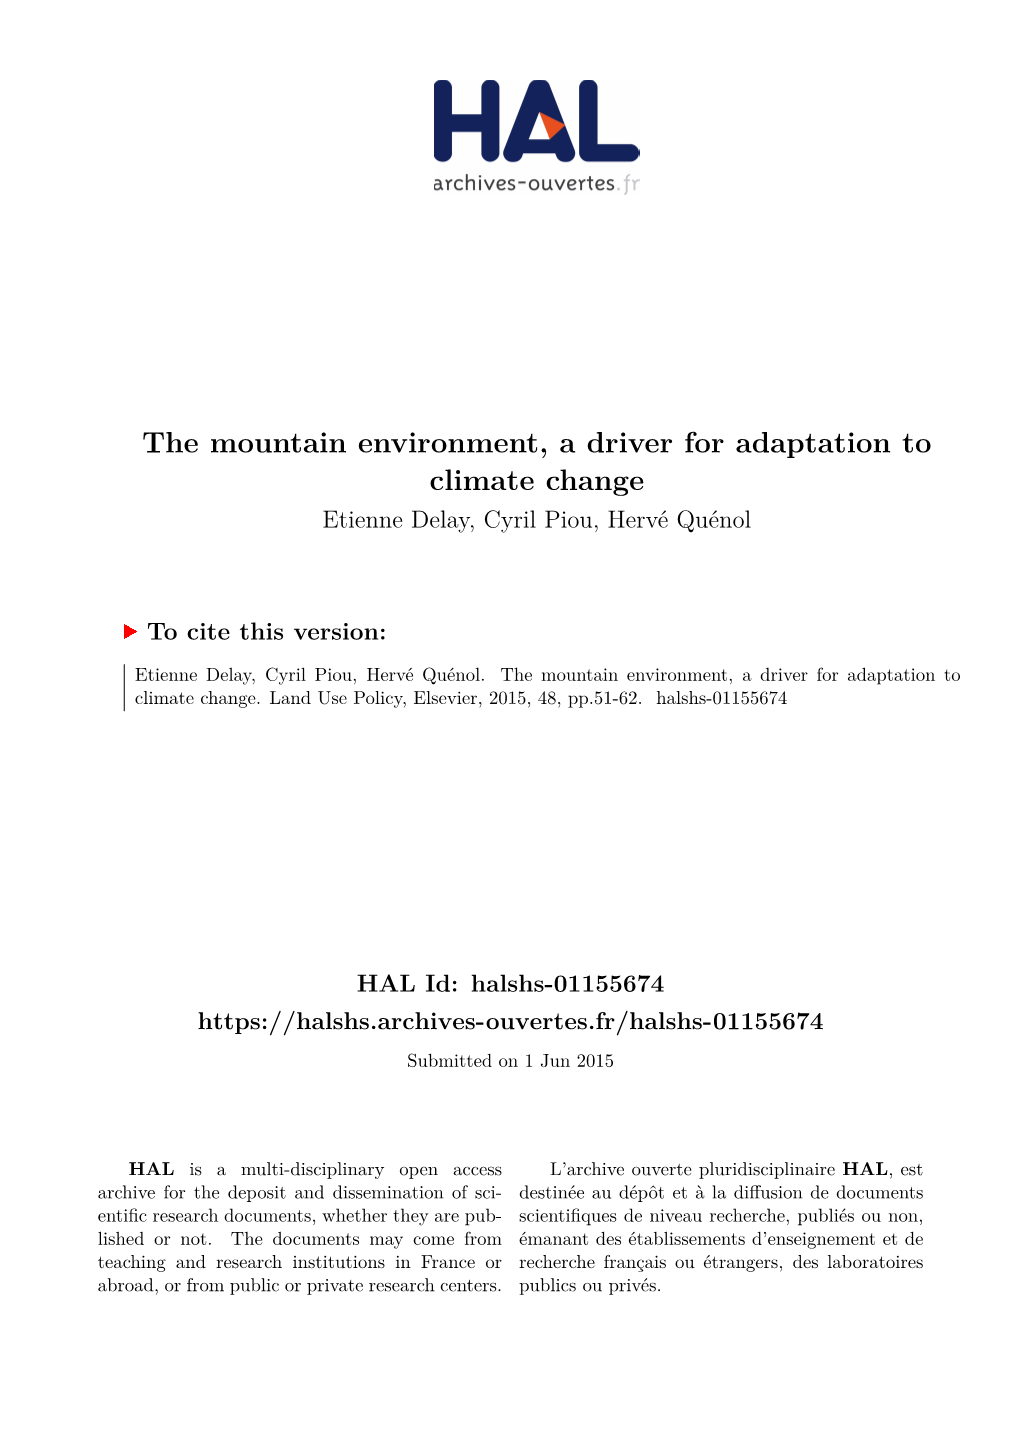 The Mountain Environment, a Driver for Adaptation to Climate Change Etienne Delay, Cyril Piou, Hervé Quénol